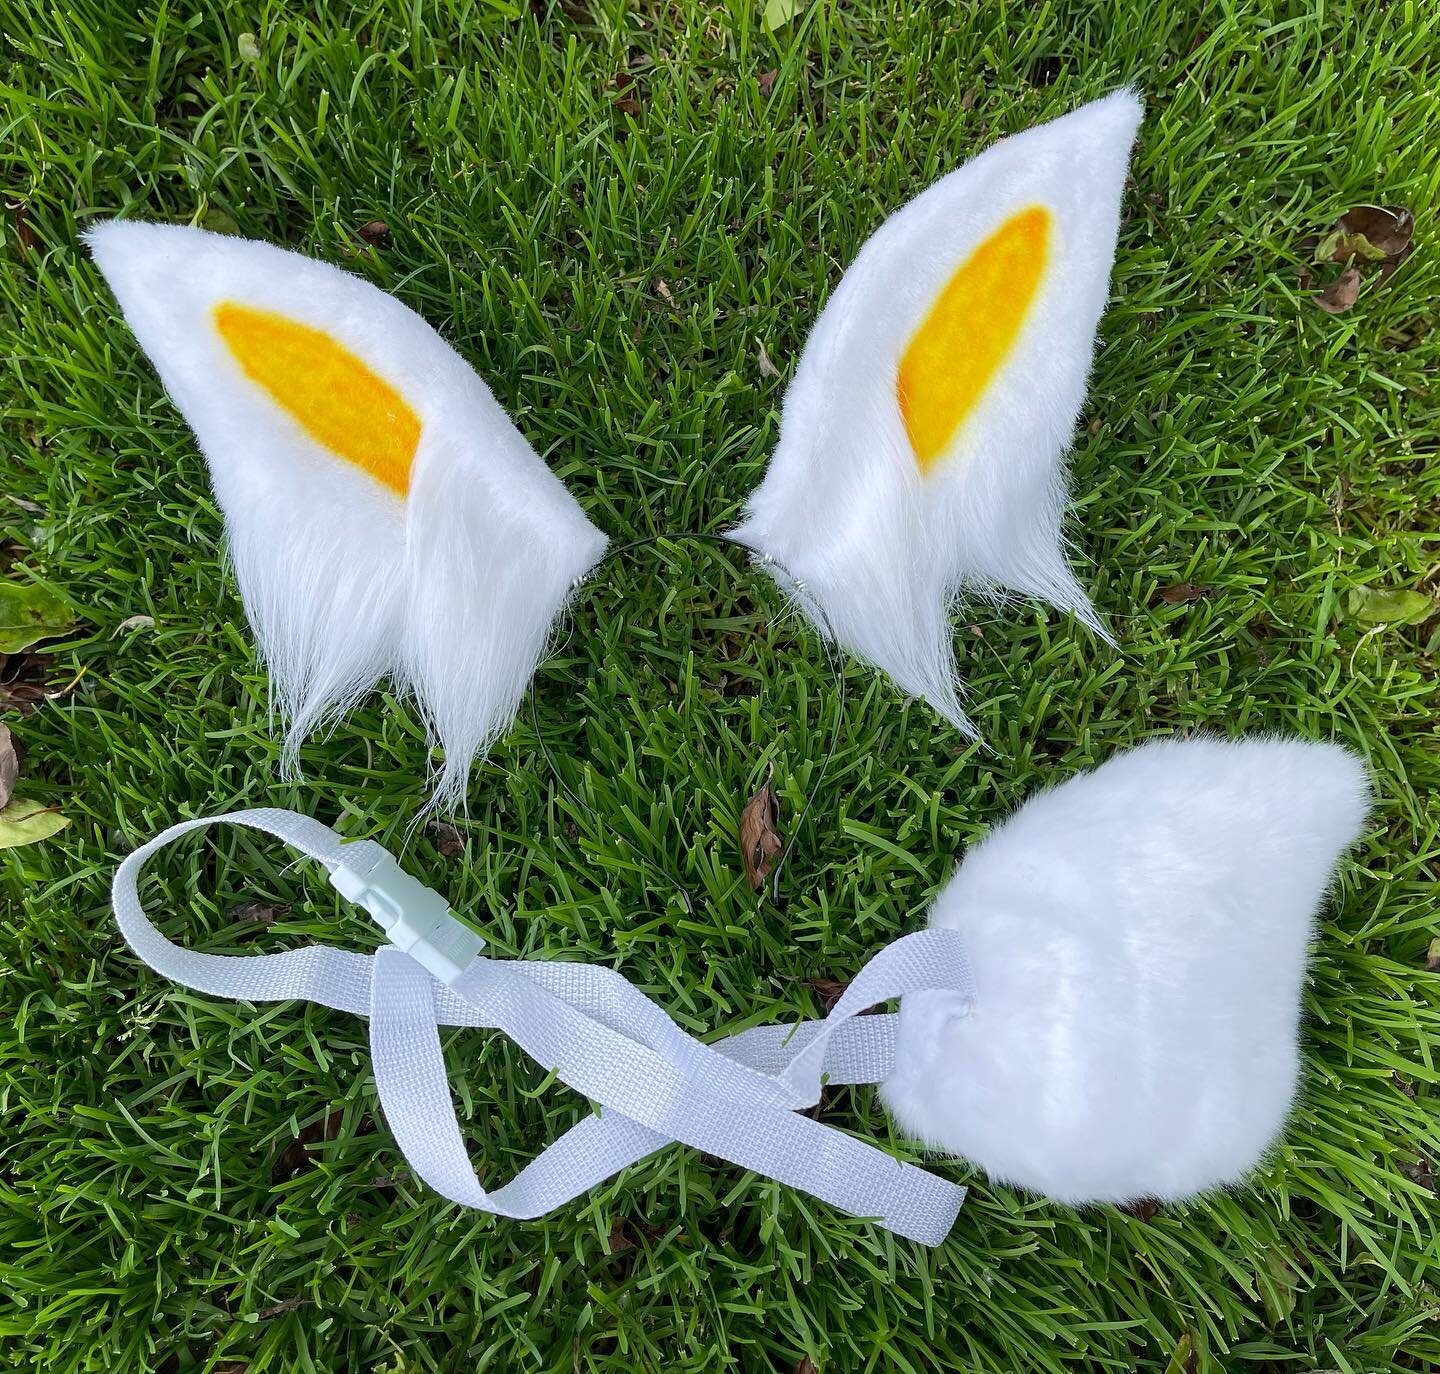 Custom ear and tail set for an Etsy customer based on Cinderace from Pok&eacute;mon Sword and Shield
.
.
.
#cosplay #pokemoncosplay #cinderace #cinderacecosplay #scorbunny #pokemonswordshield #furry #furryears